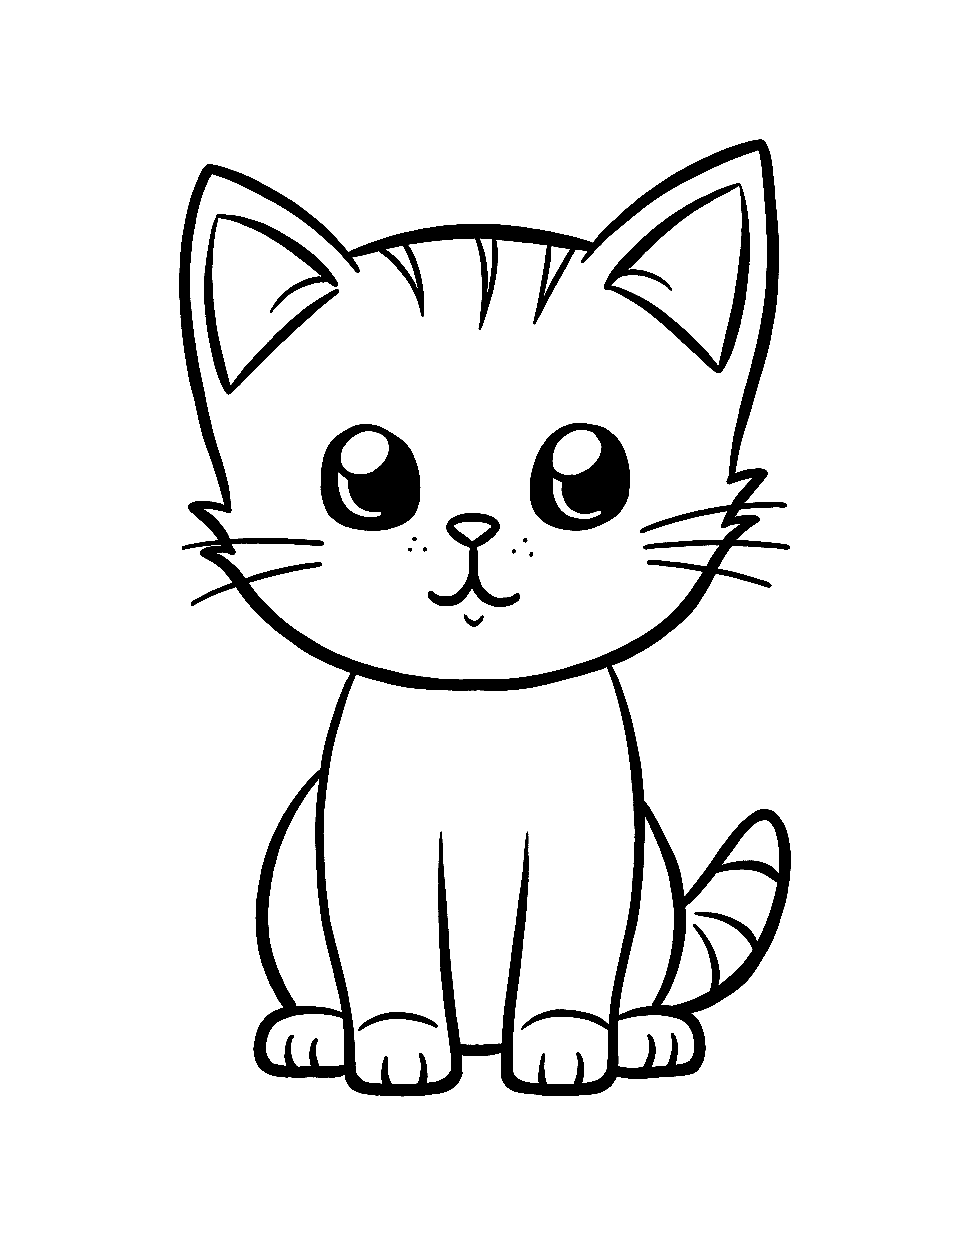 Simple Seated Kitten Coloring Page - A basic drawing of a kitten sitting and looking forward.